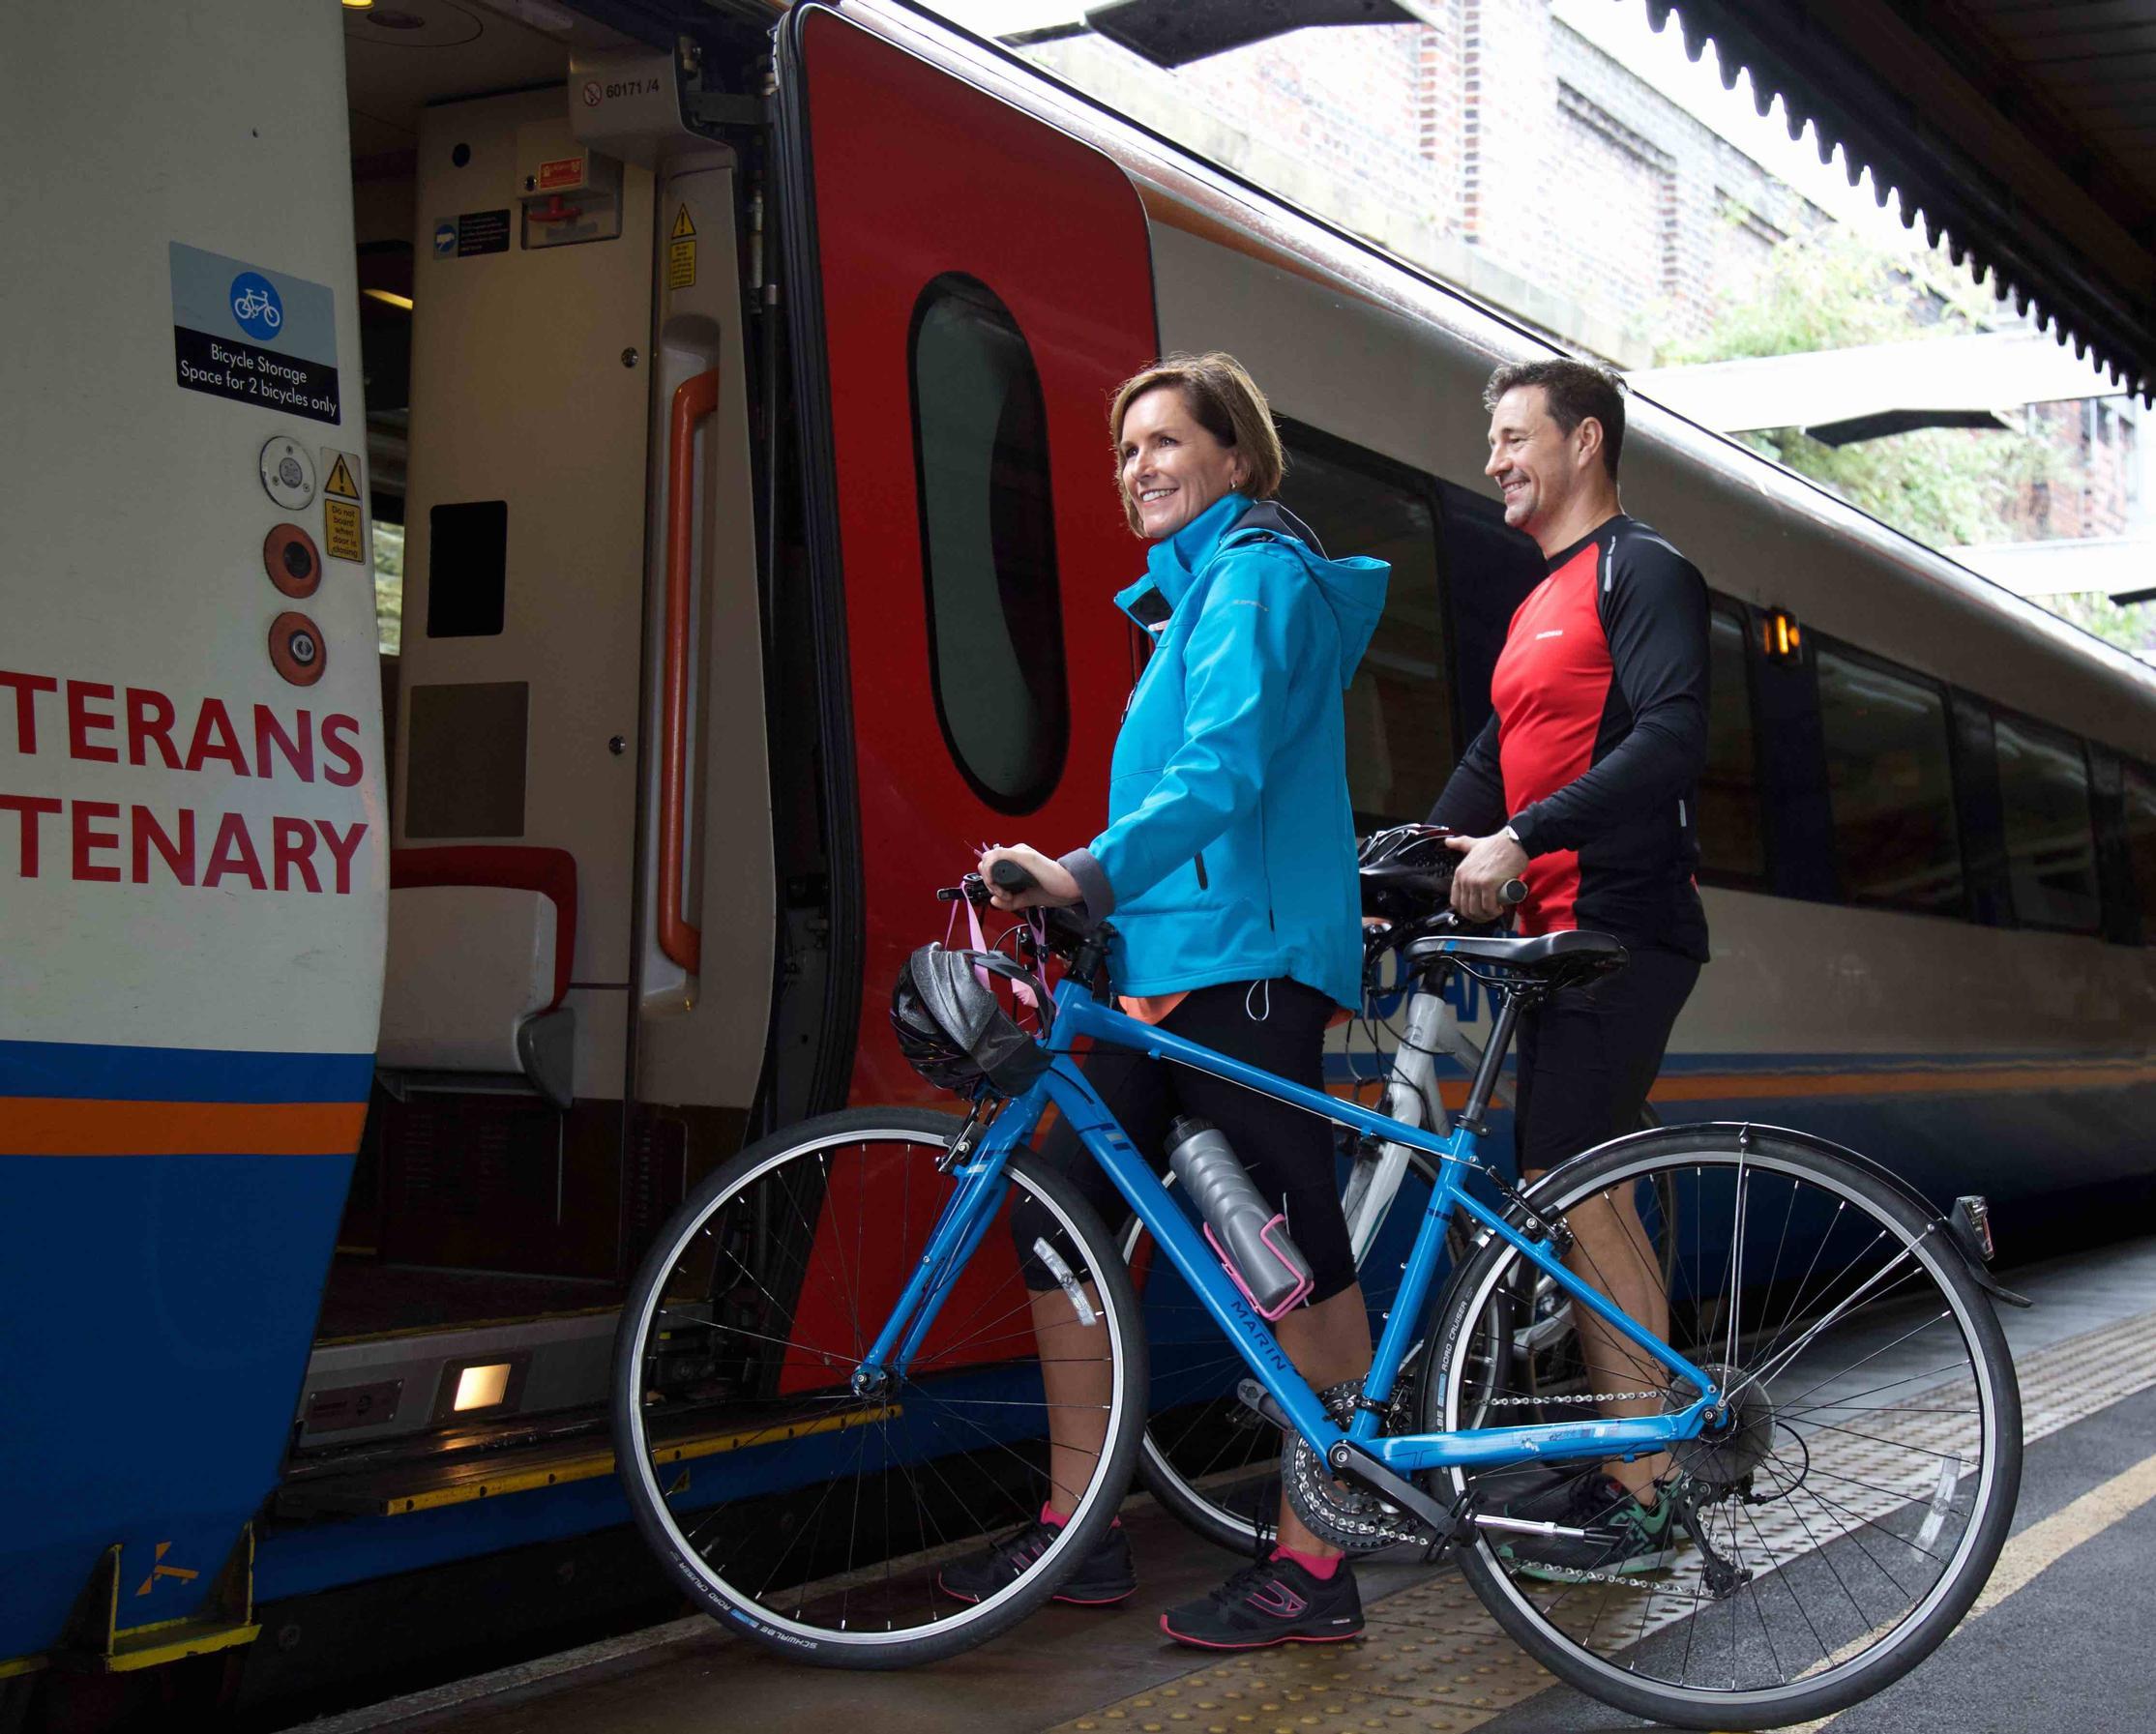 The updated ‘Cycle-Rail Toolkit 3’ includes advice on providing space for cyclists and their cycles at stations and onboard trains